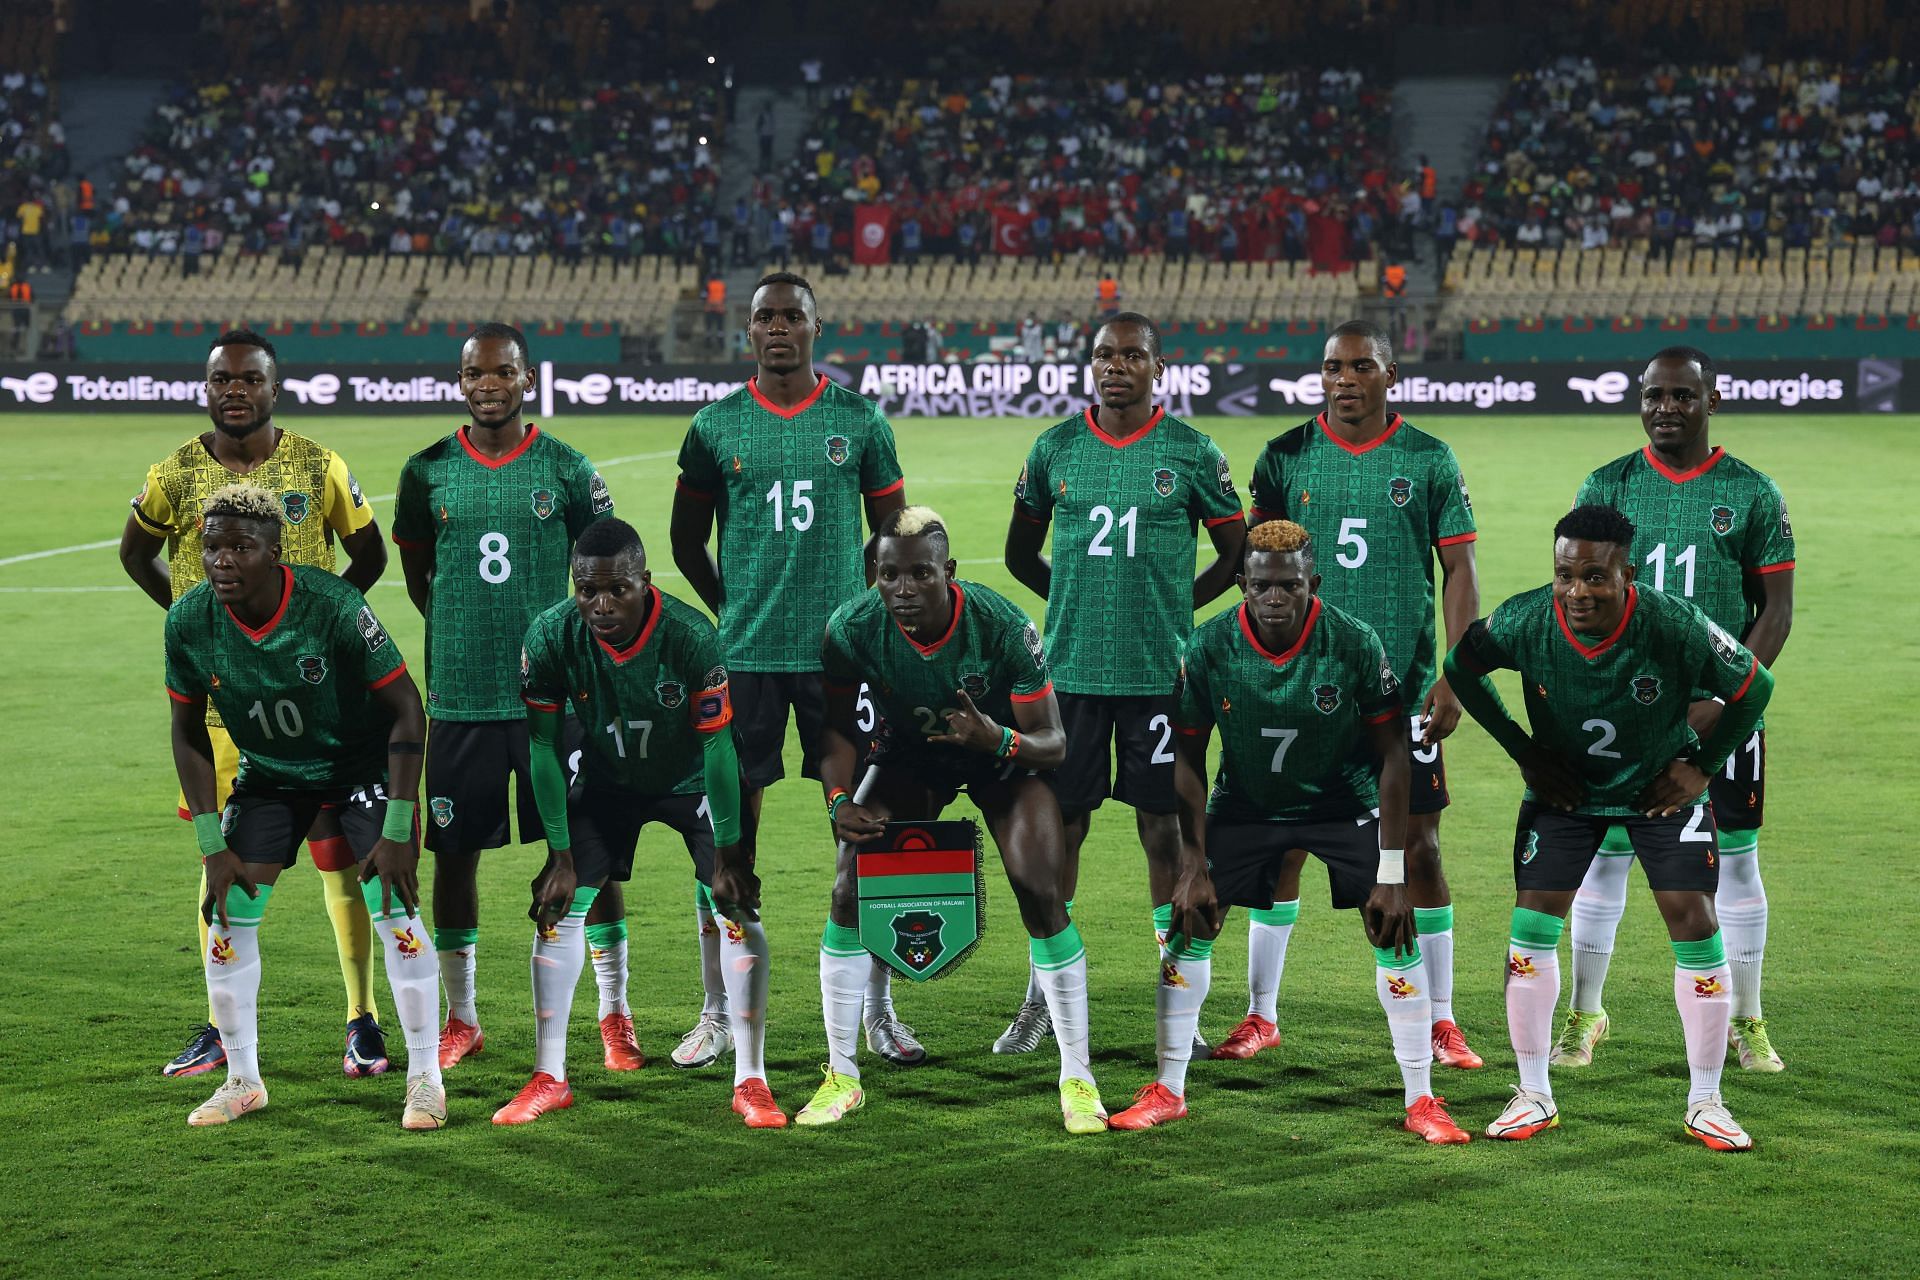 Malawi will face Ethiopia on Tuesday